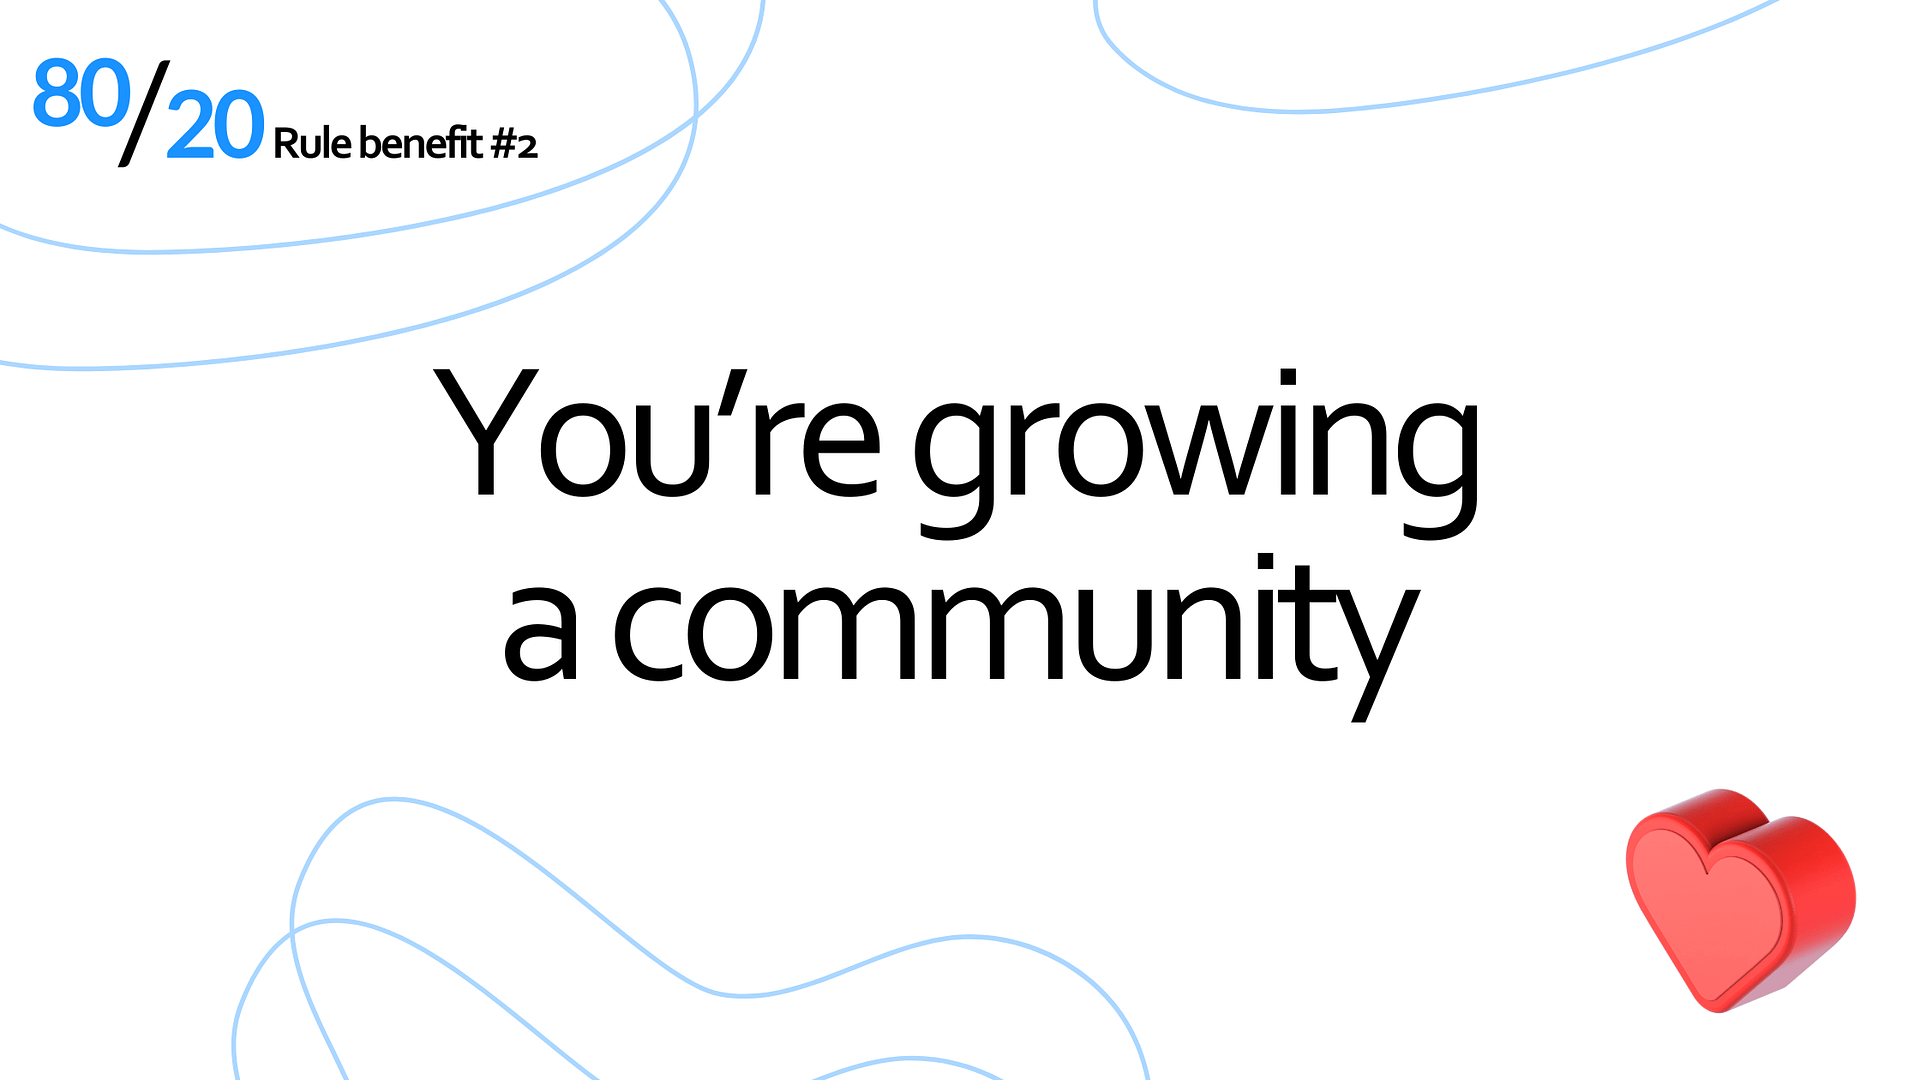 You're growing a community - 80/20 rule Instagram benefit